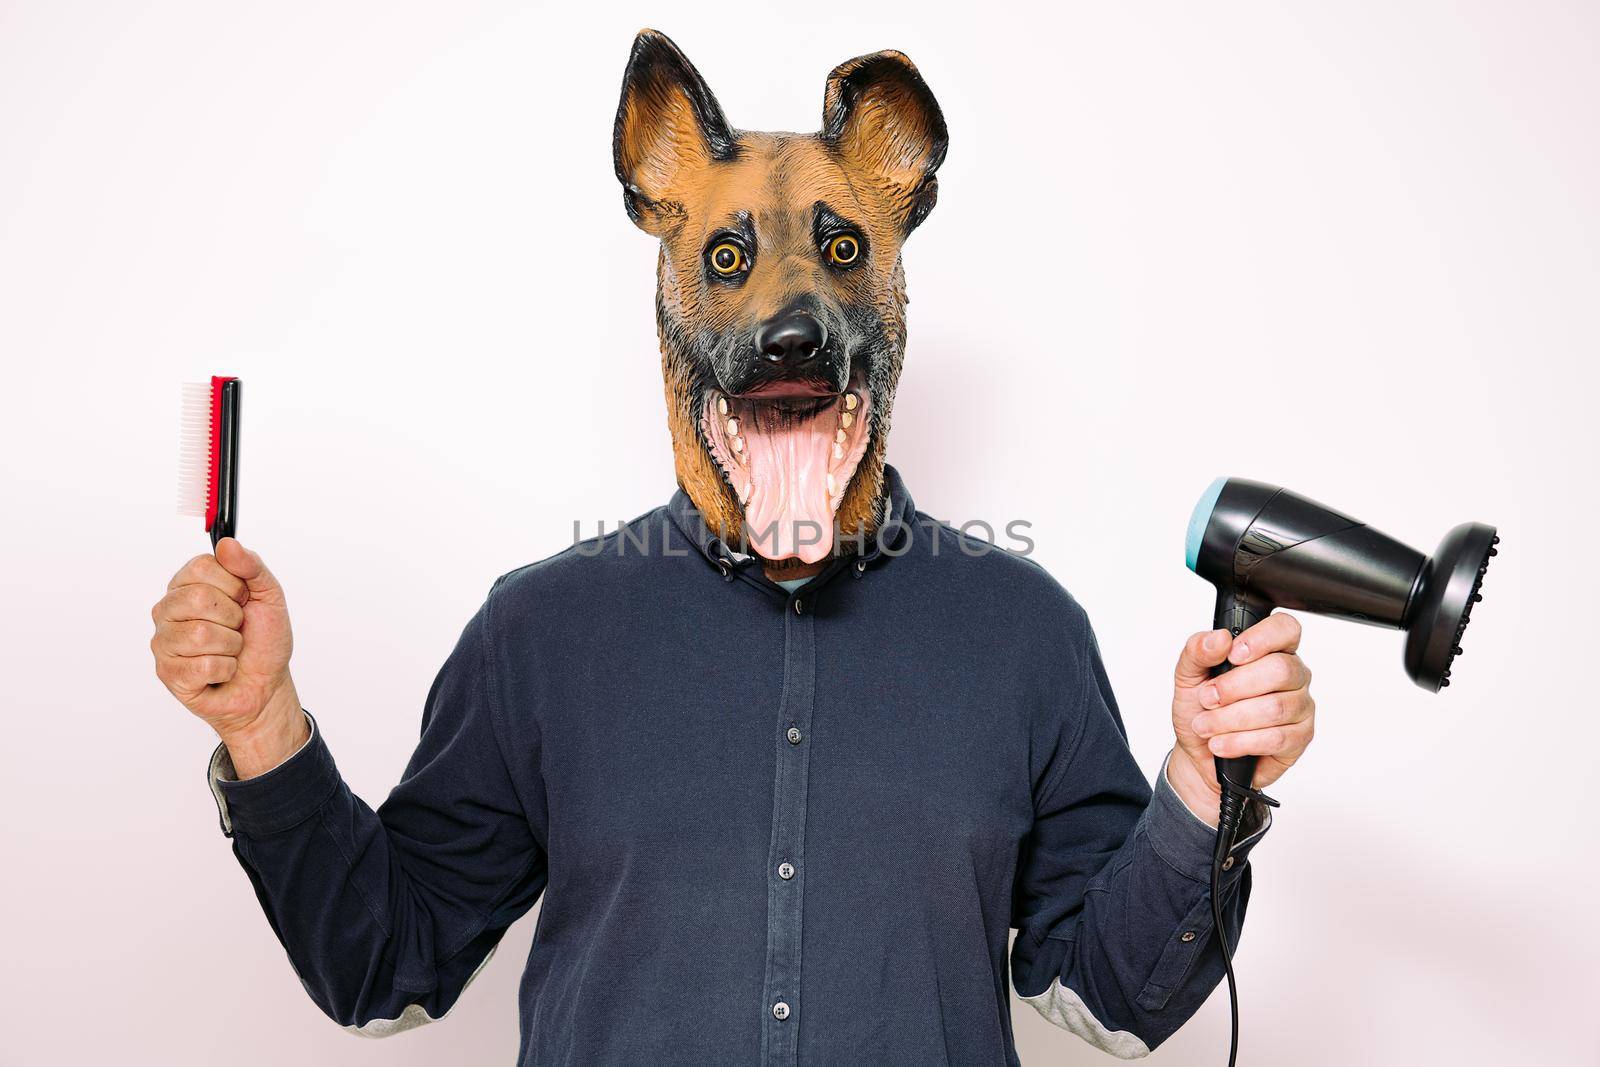 person with a dog mask holding a hairbrush and a hairdryer on white background, concept of hairdressing and grooming of pets